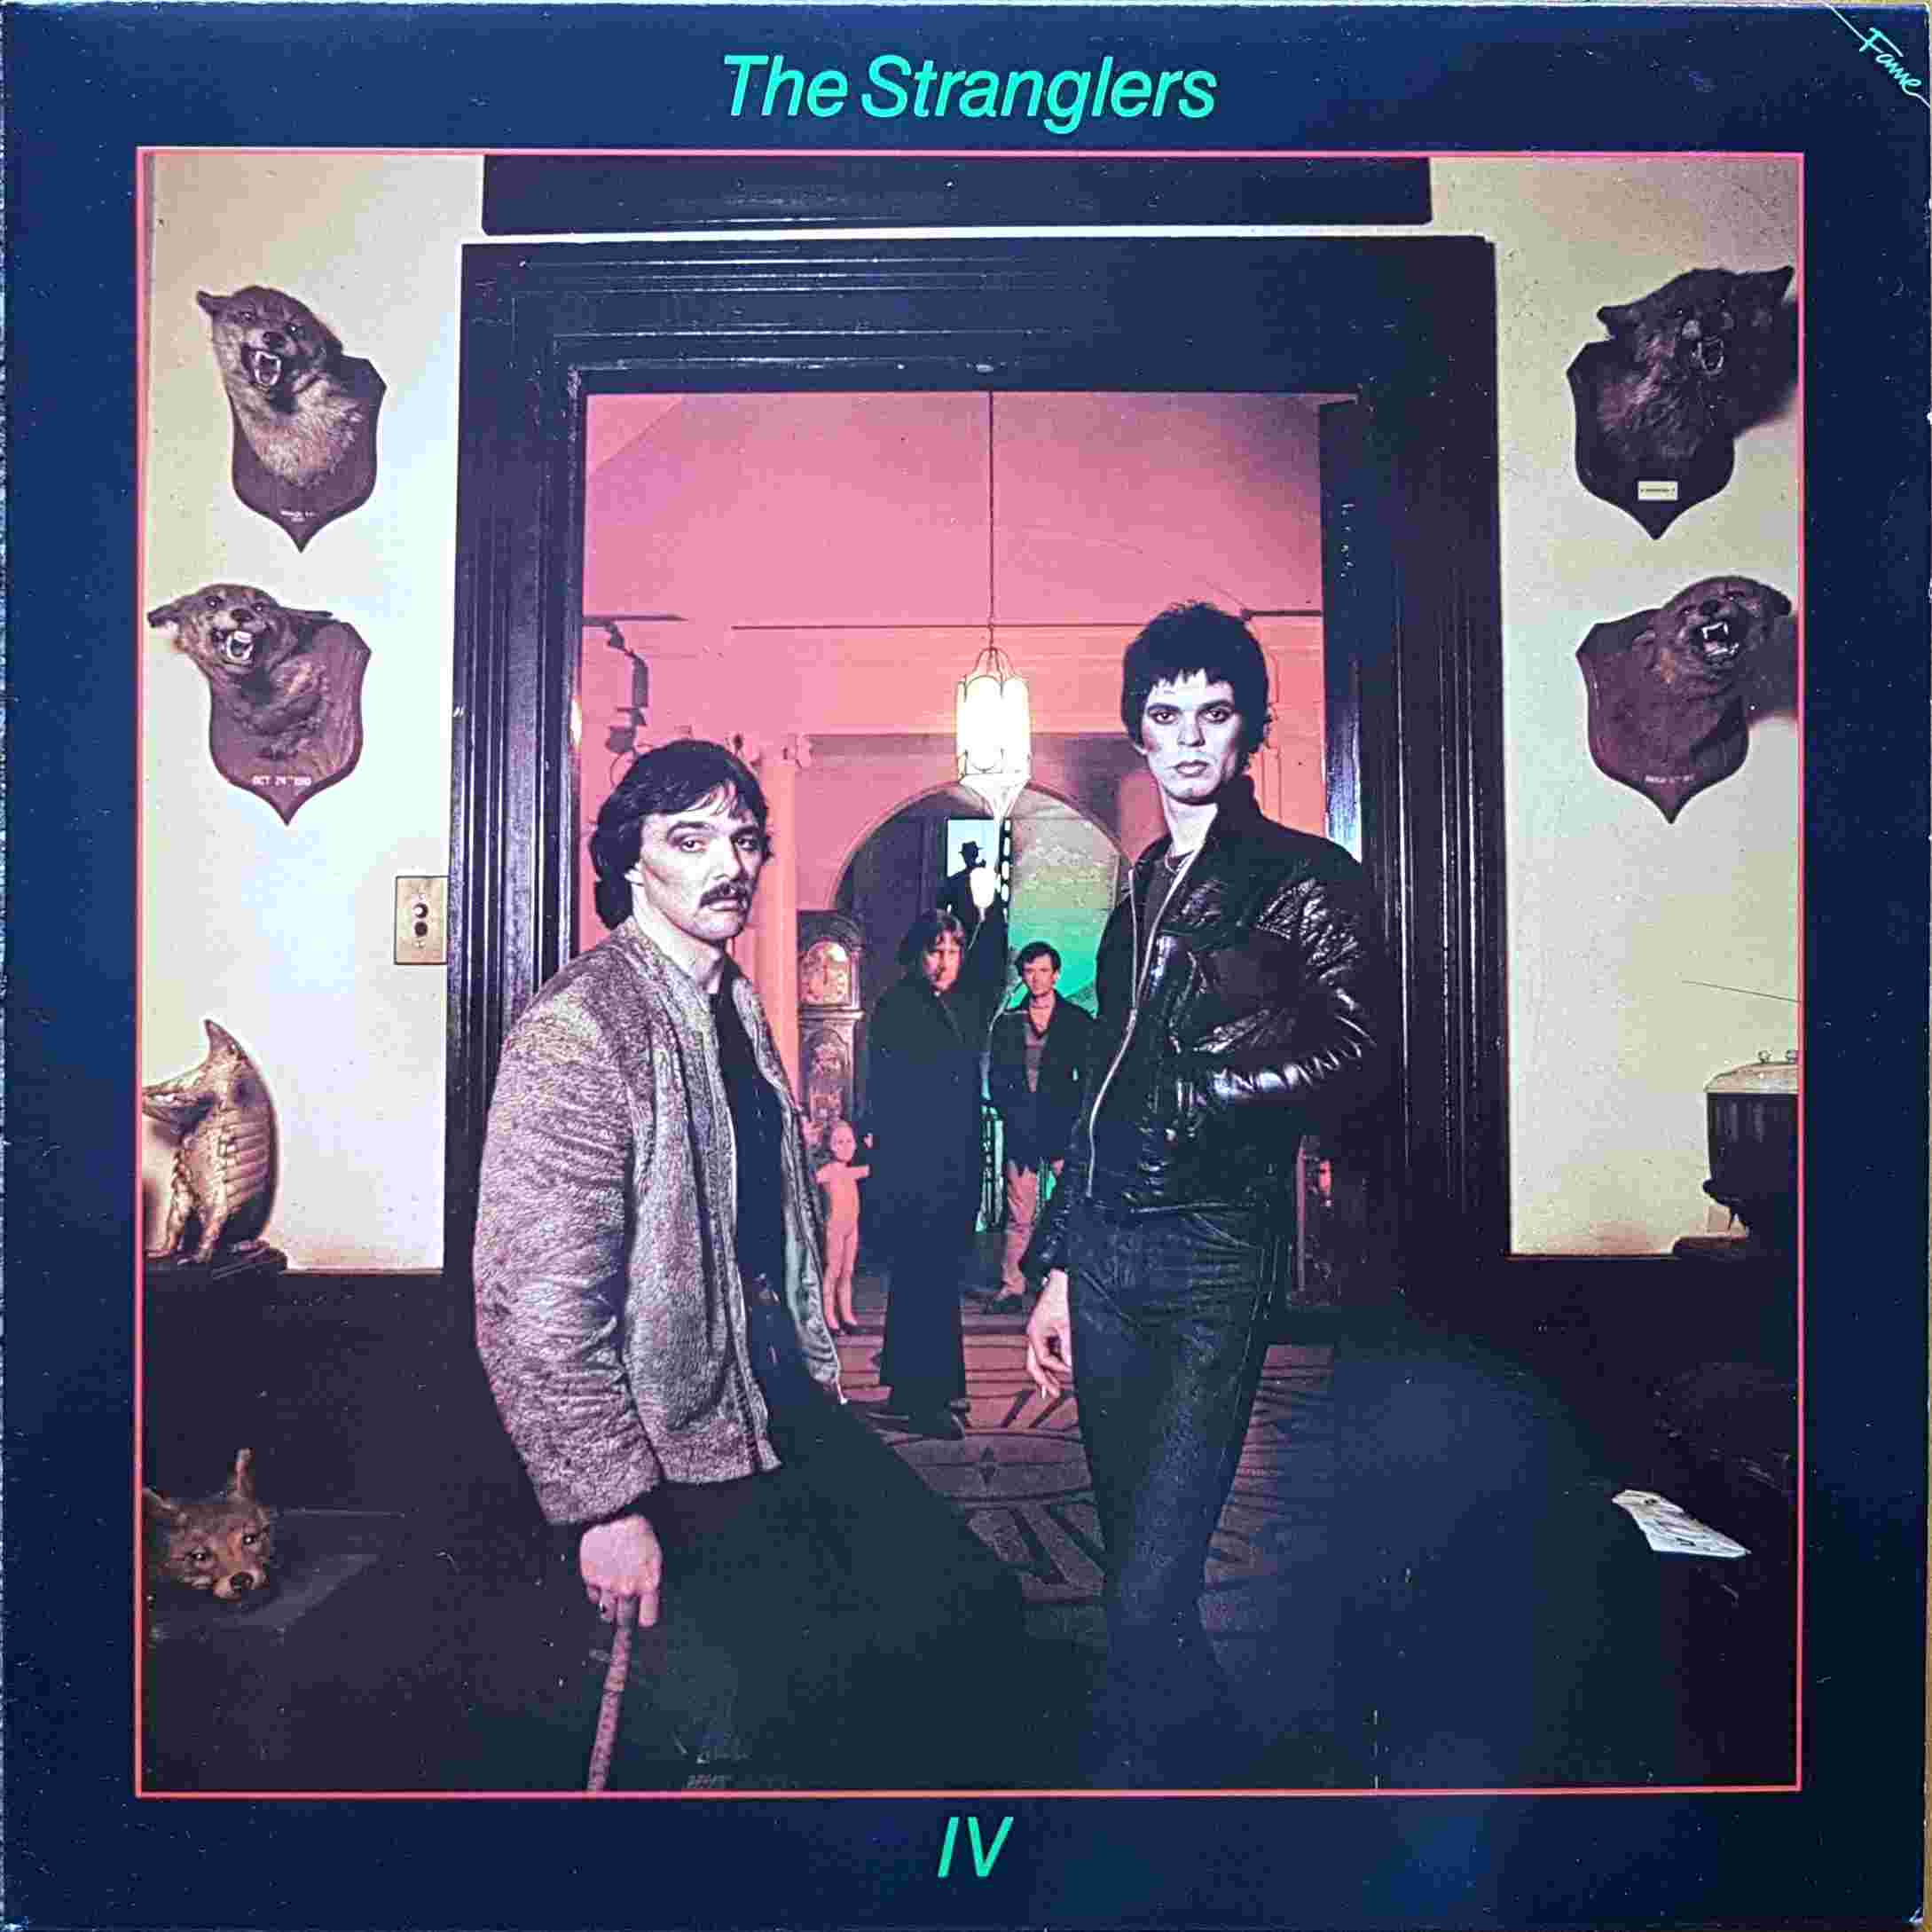 Picture of FA 3001 Rattus norvegicus by artist The Stranglers  from The Stranglers albums